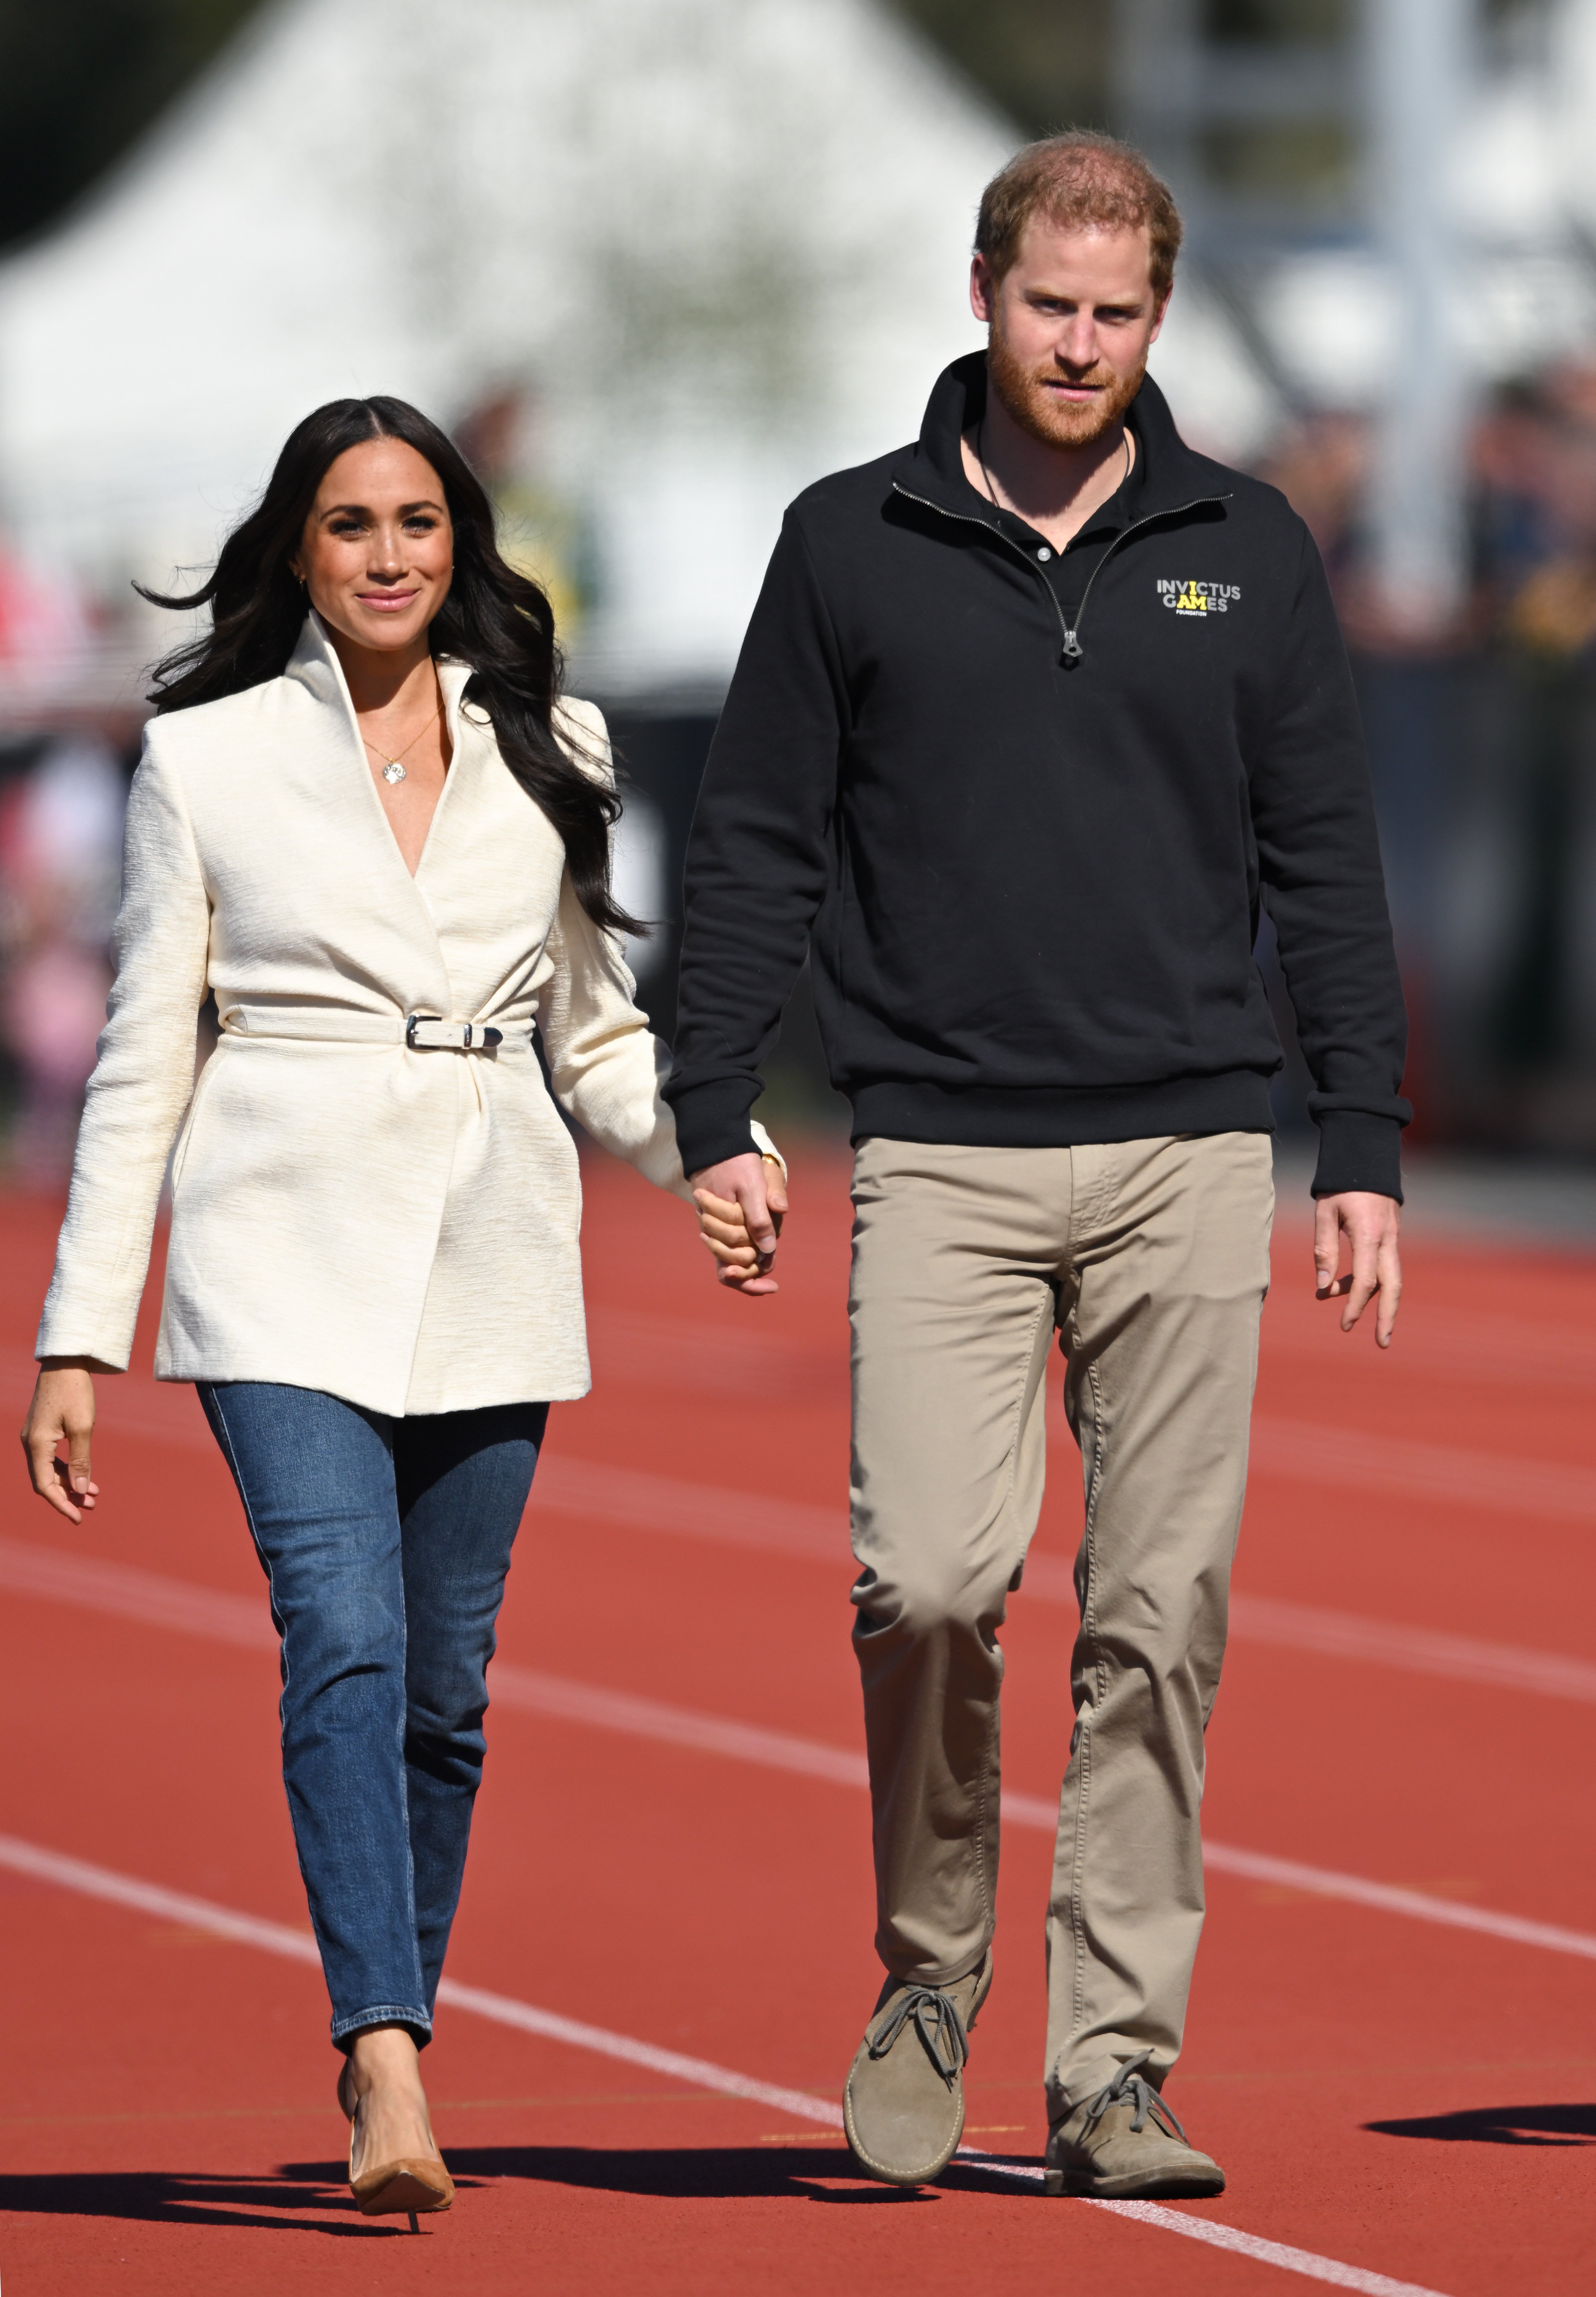 Prince Harry, Duke of Sussex and Meghan, Duchess of Sussex attend the athletics event during the Invictus Games at Zuiderpark on April 17, 2022 in The Hague, Netherlands | Source: Getty Images